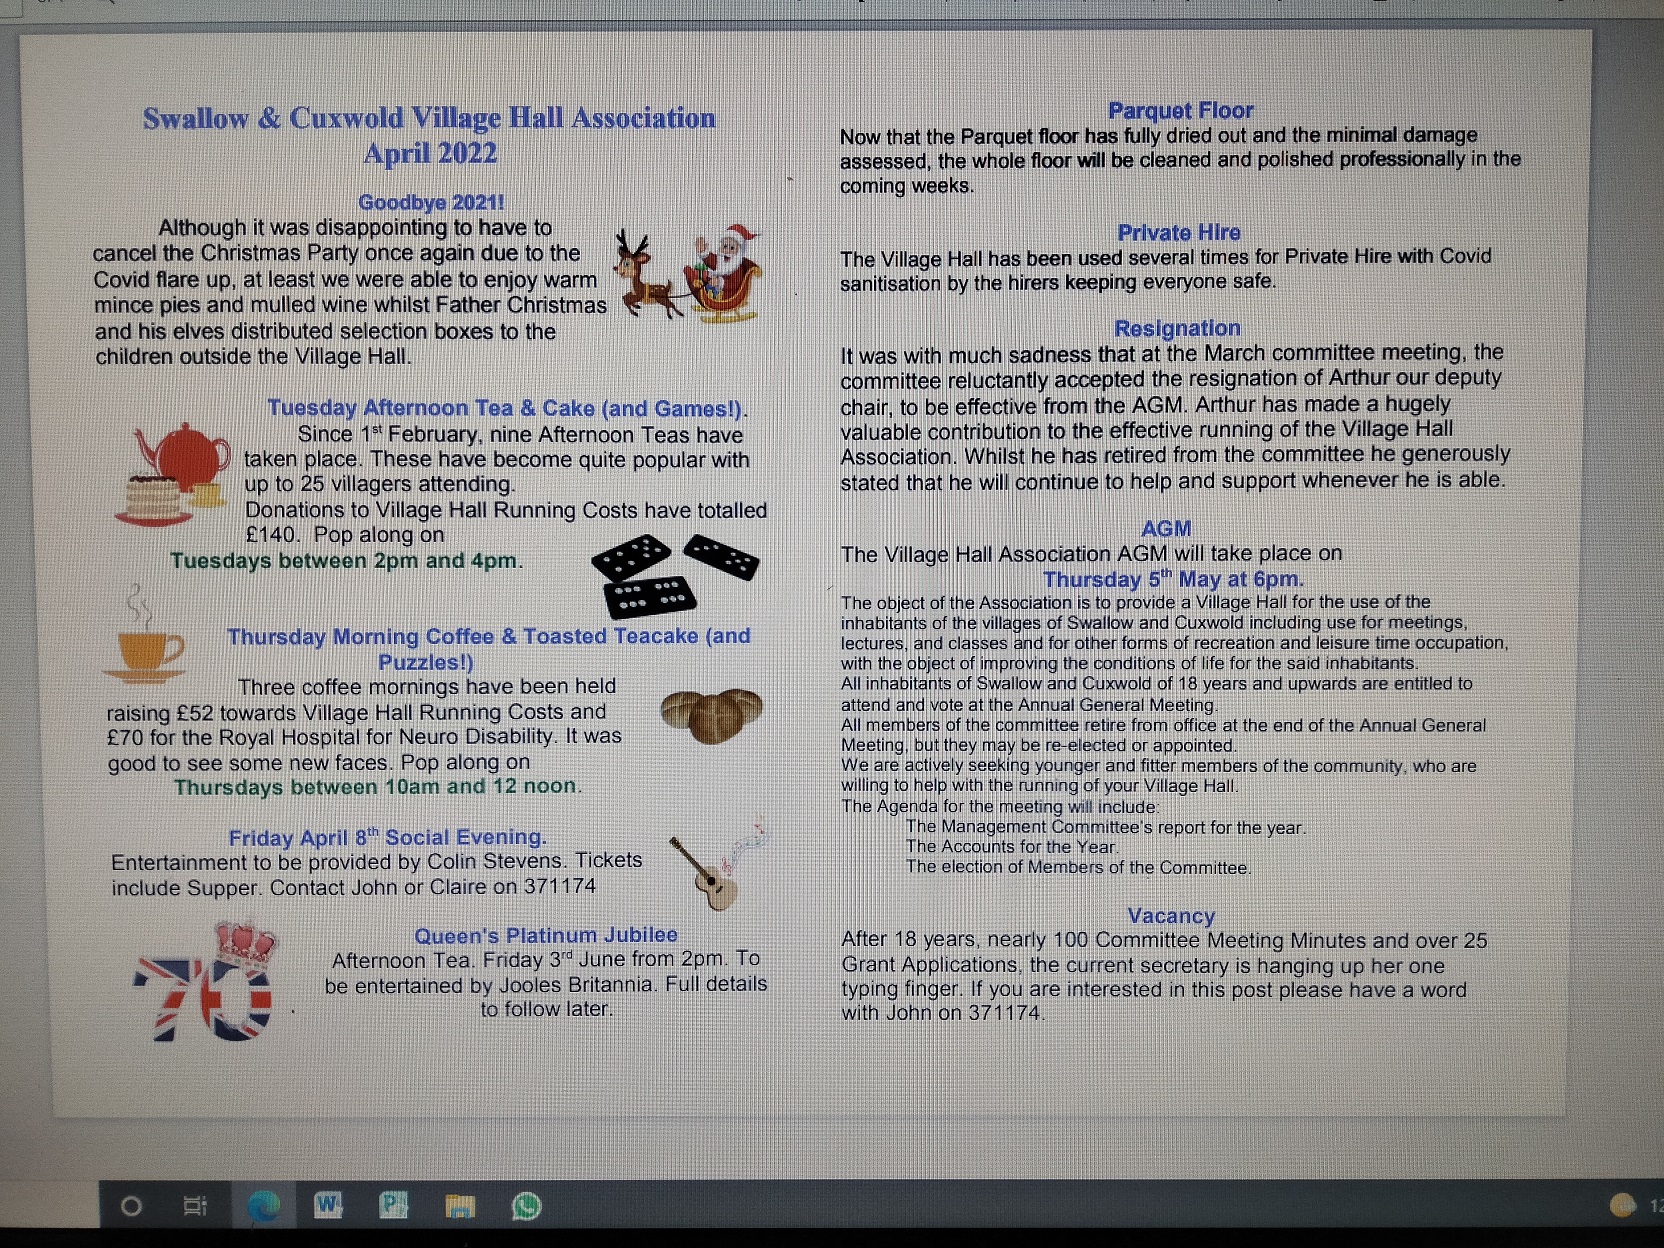 Swallow and Cuxwold Village Hall Association Newsletter April 2022